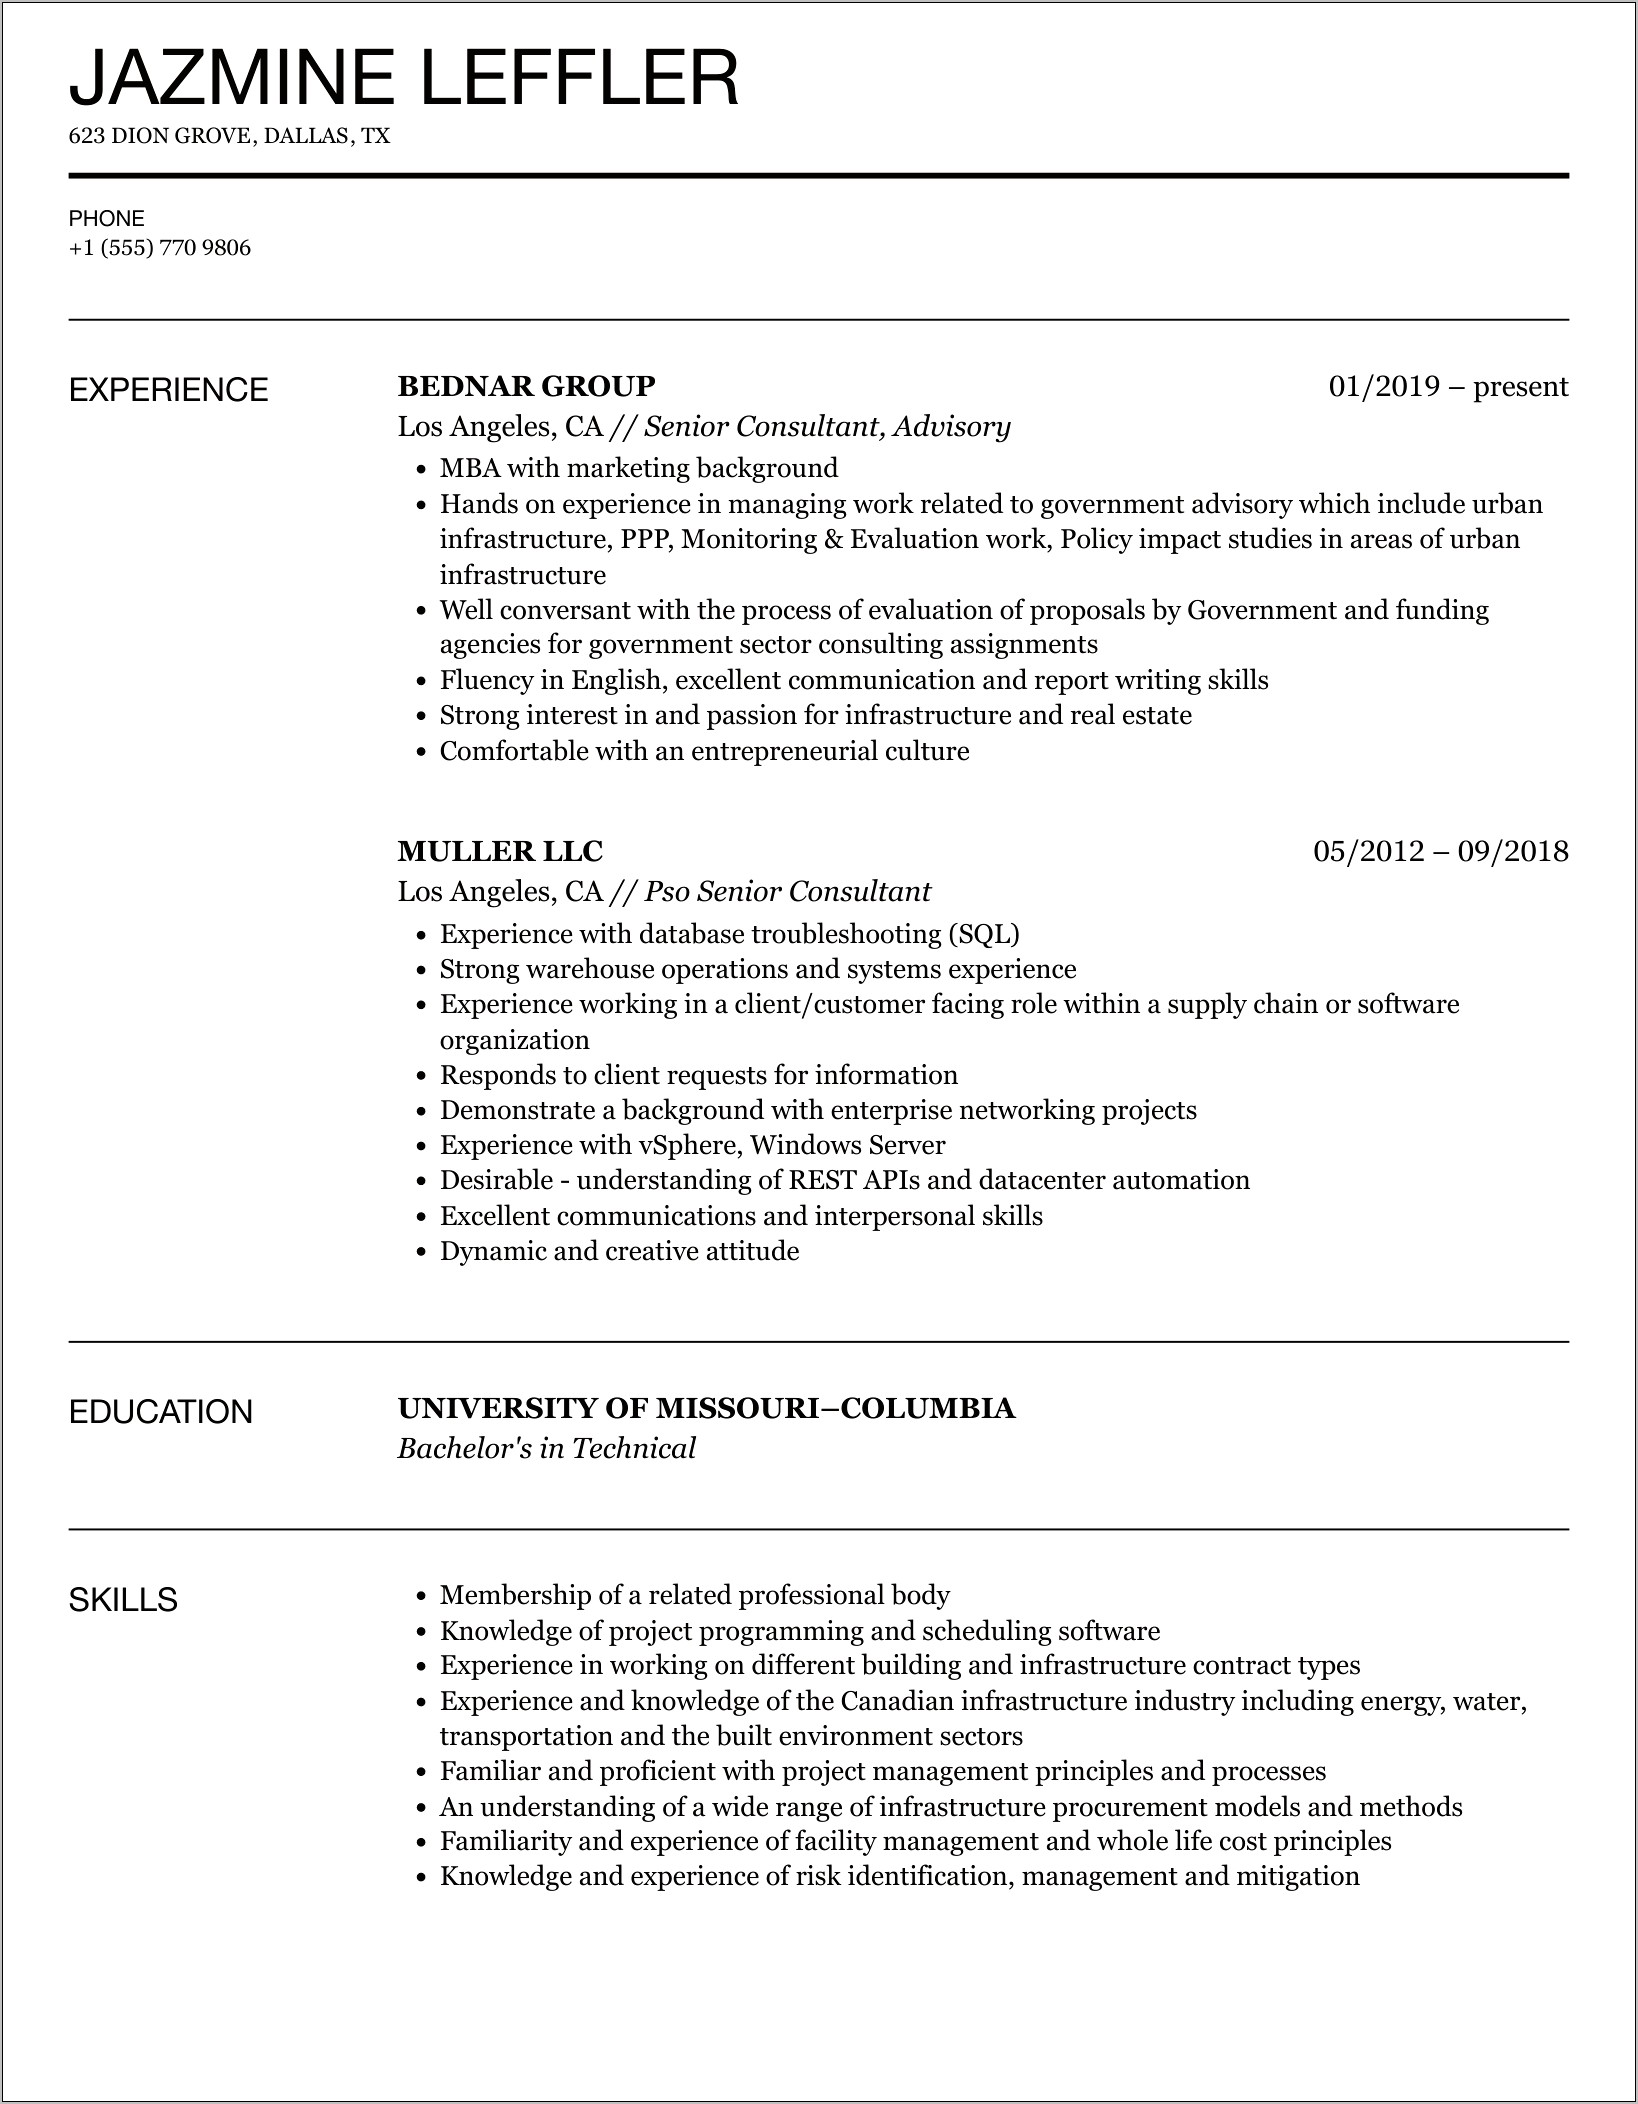 Resume Objective For Immigration Consultant